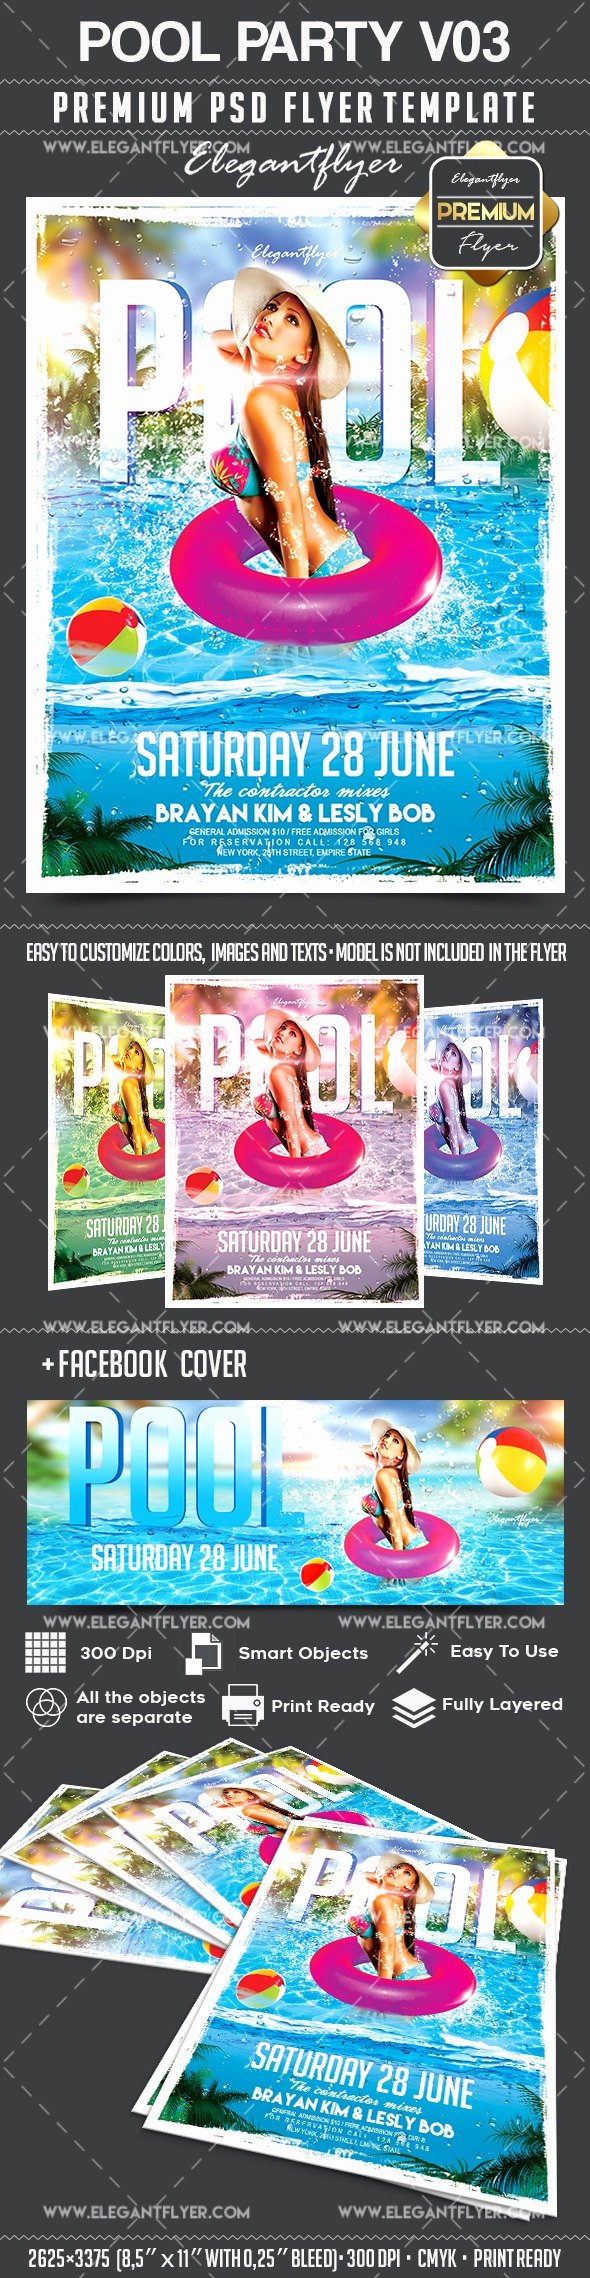 Pool Party Flyers Templates Unique Pool Party V03 – Flyer Psd Template – by Elegantflyer